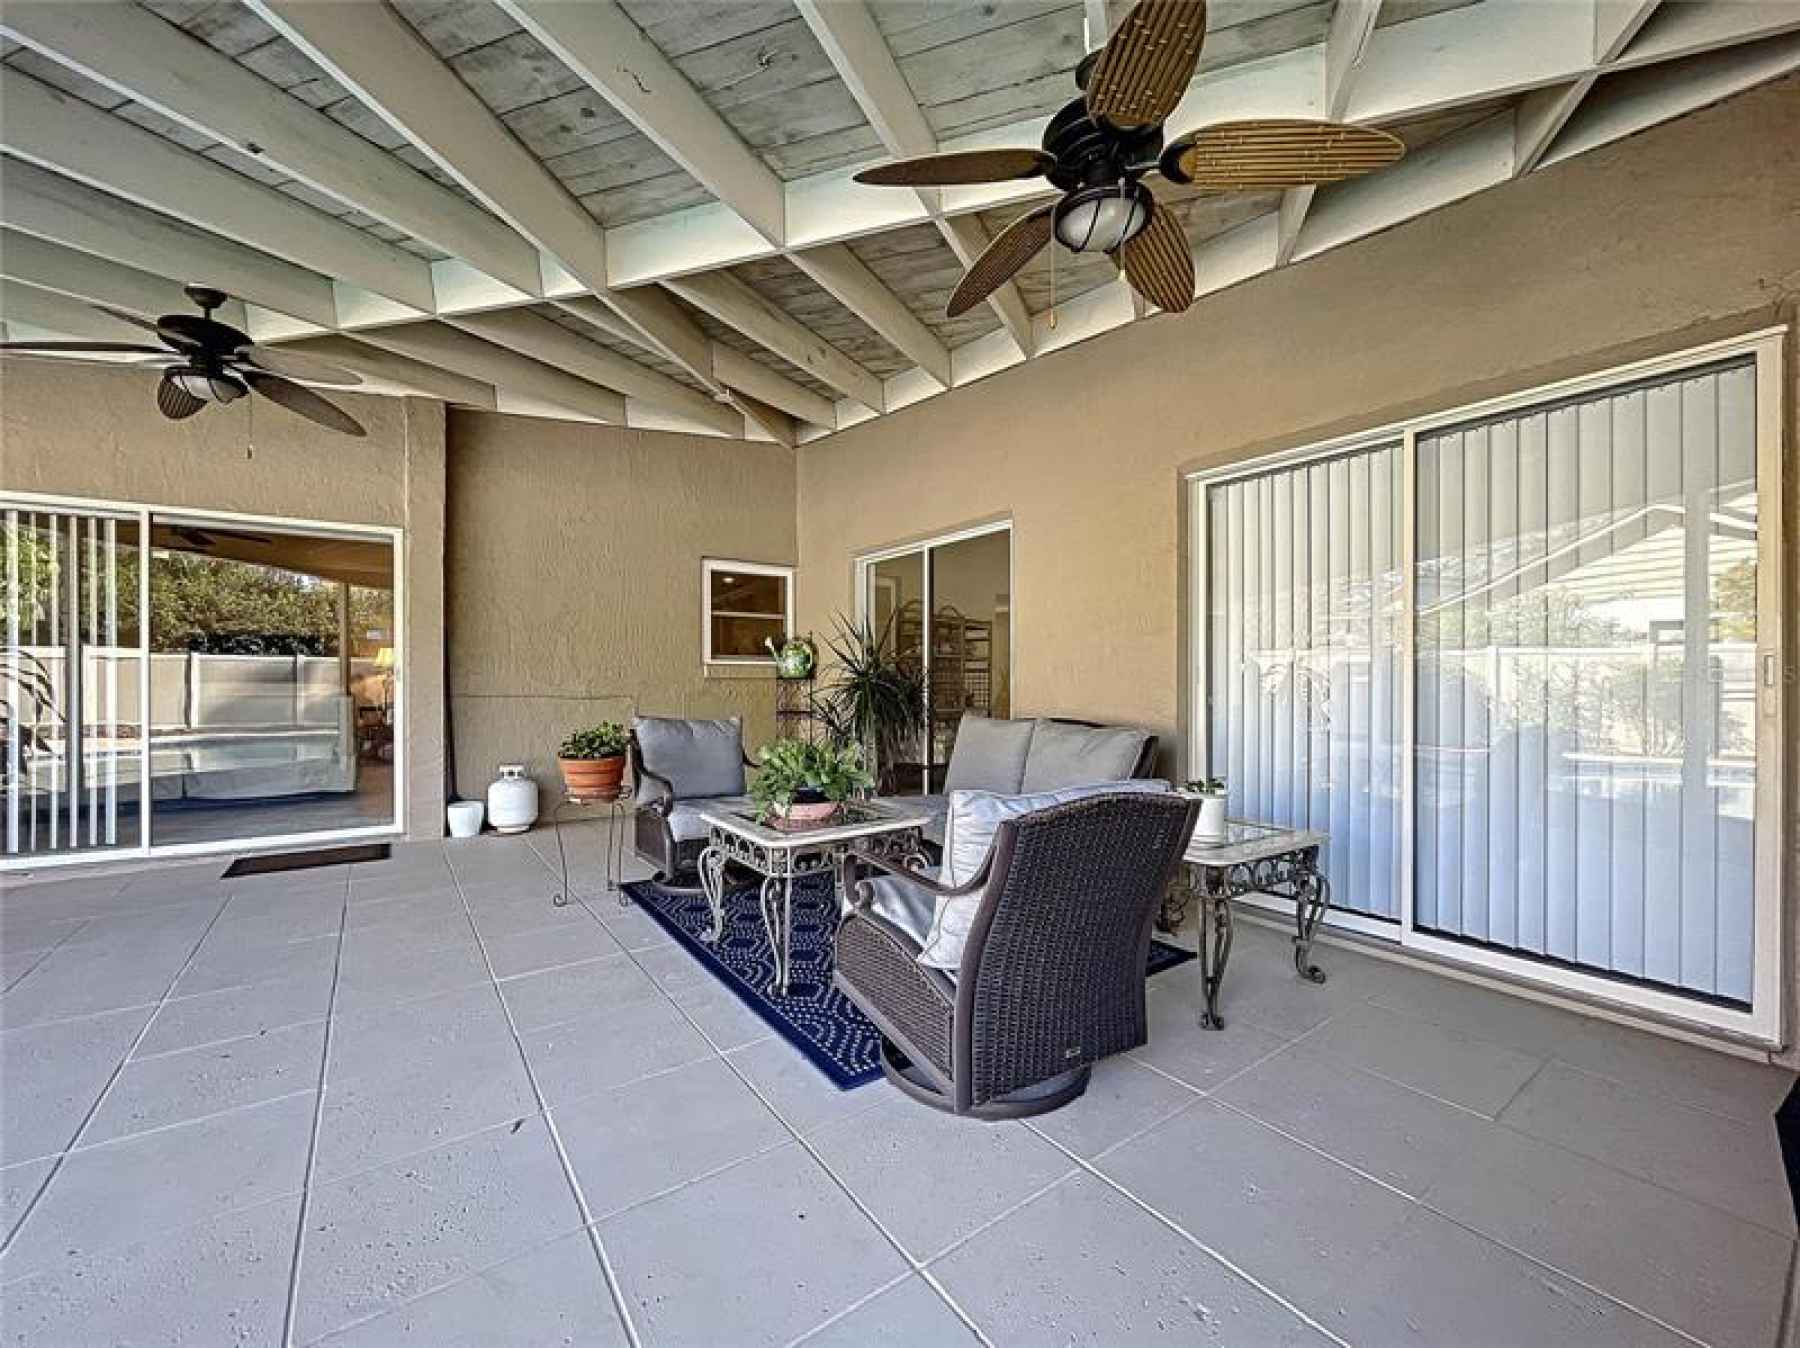 Covered Patio showing sliding glass doors